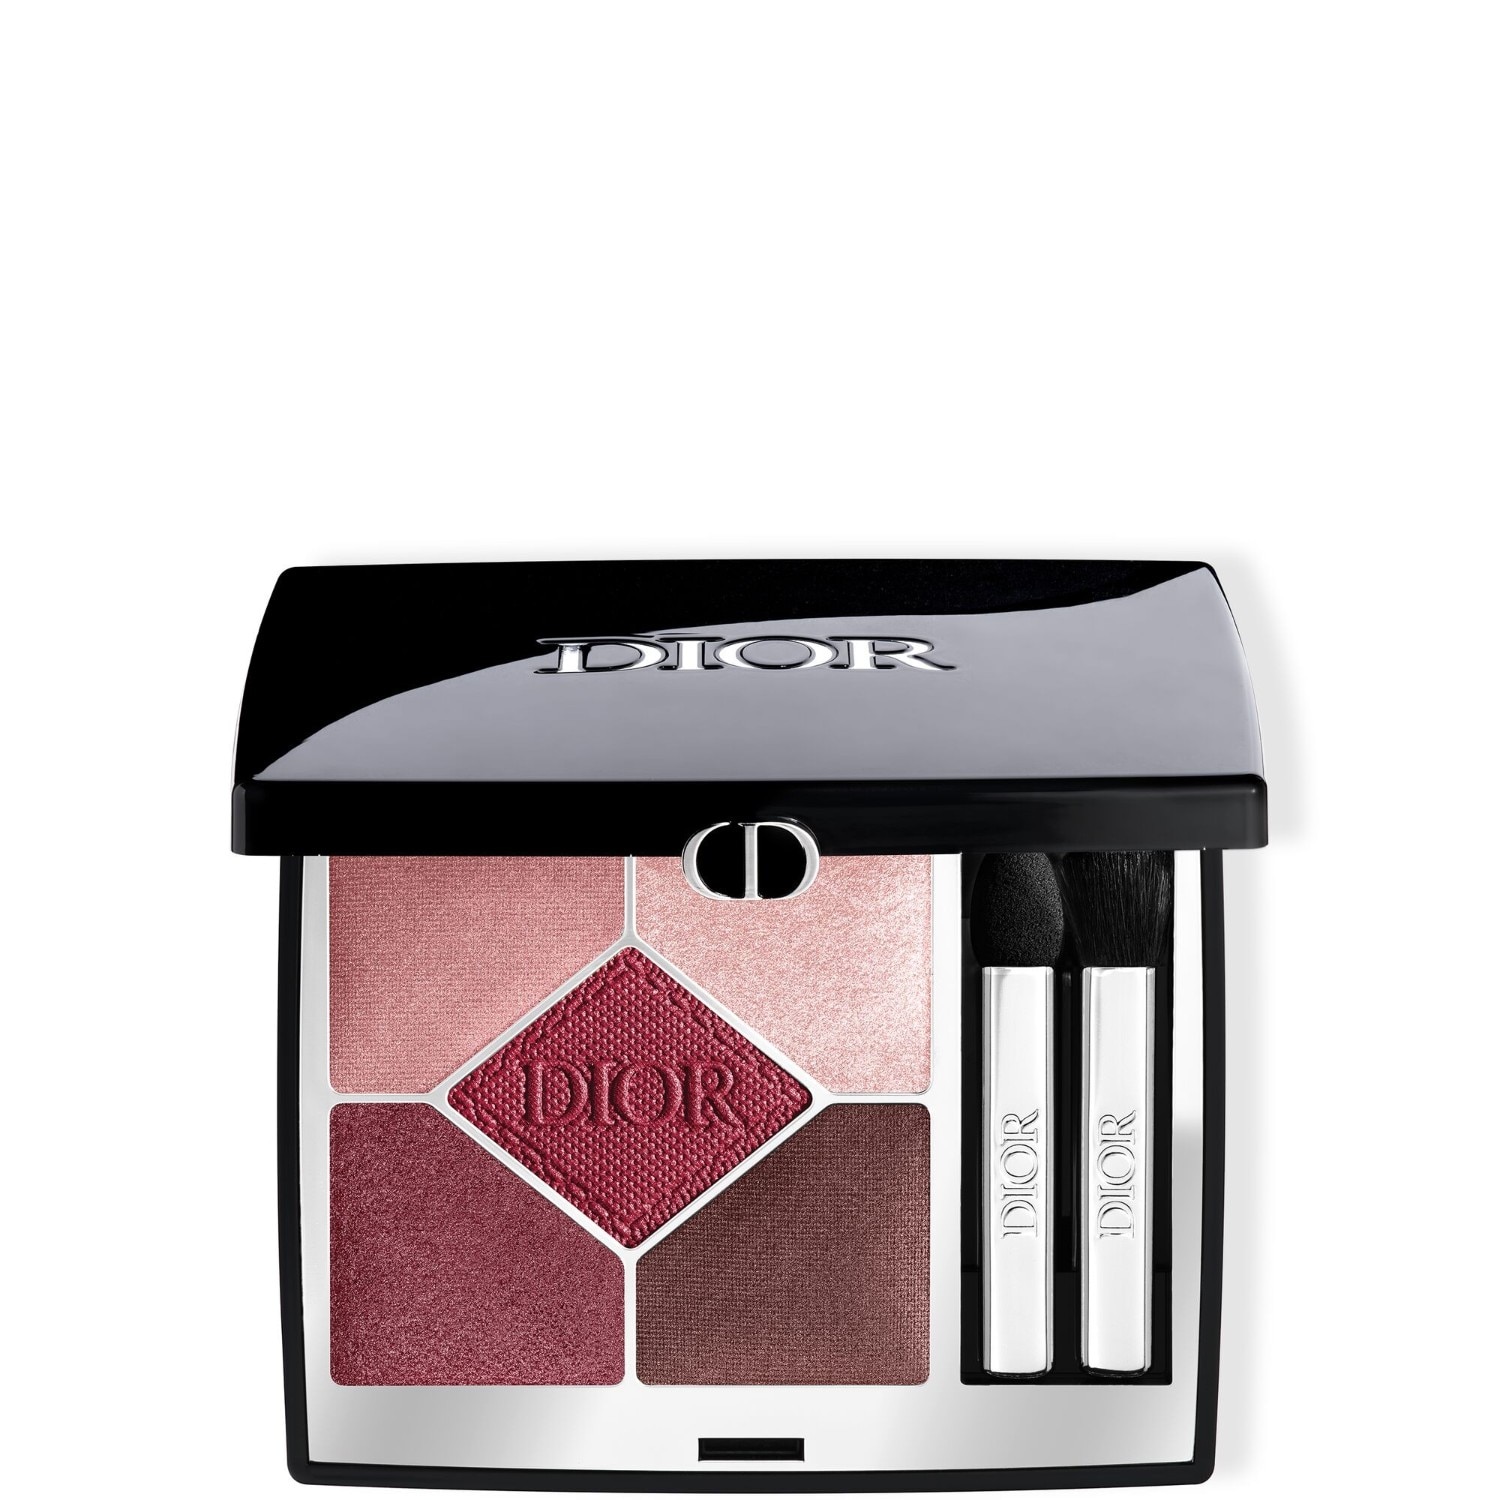 Diorshow Diorshow 5 Couleurs eyeshadow palette - creamy texture - long hold and comfort